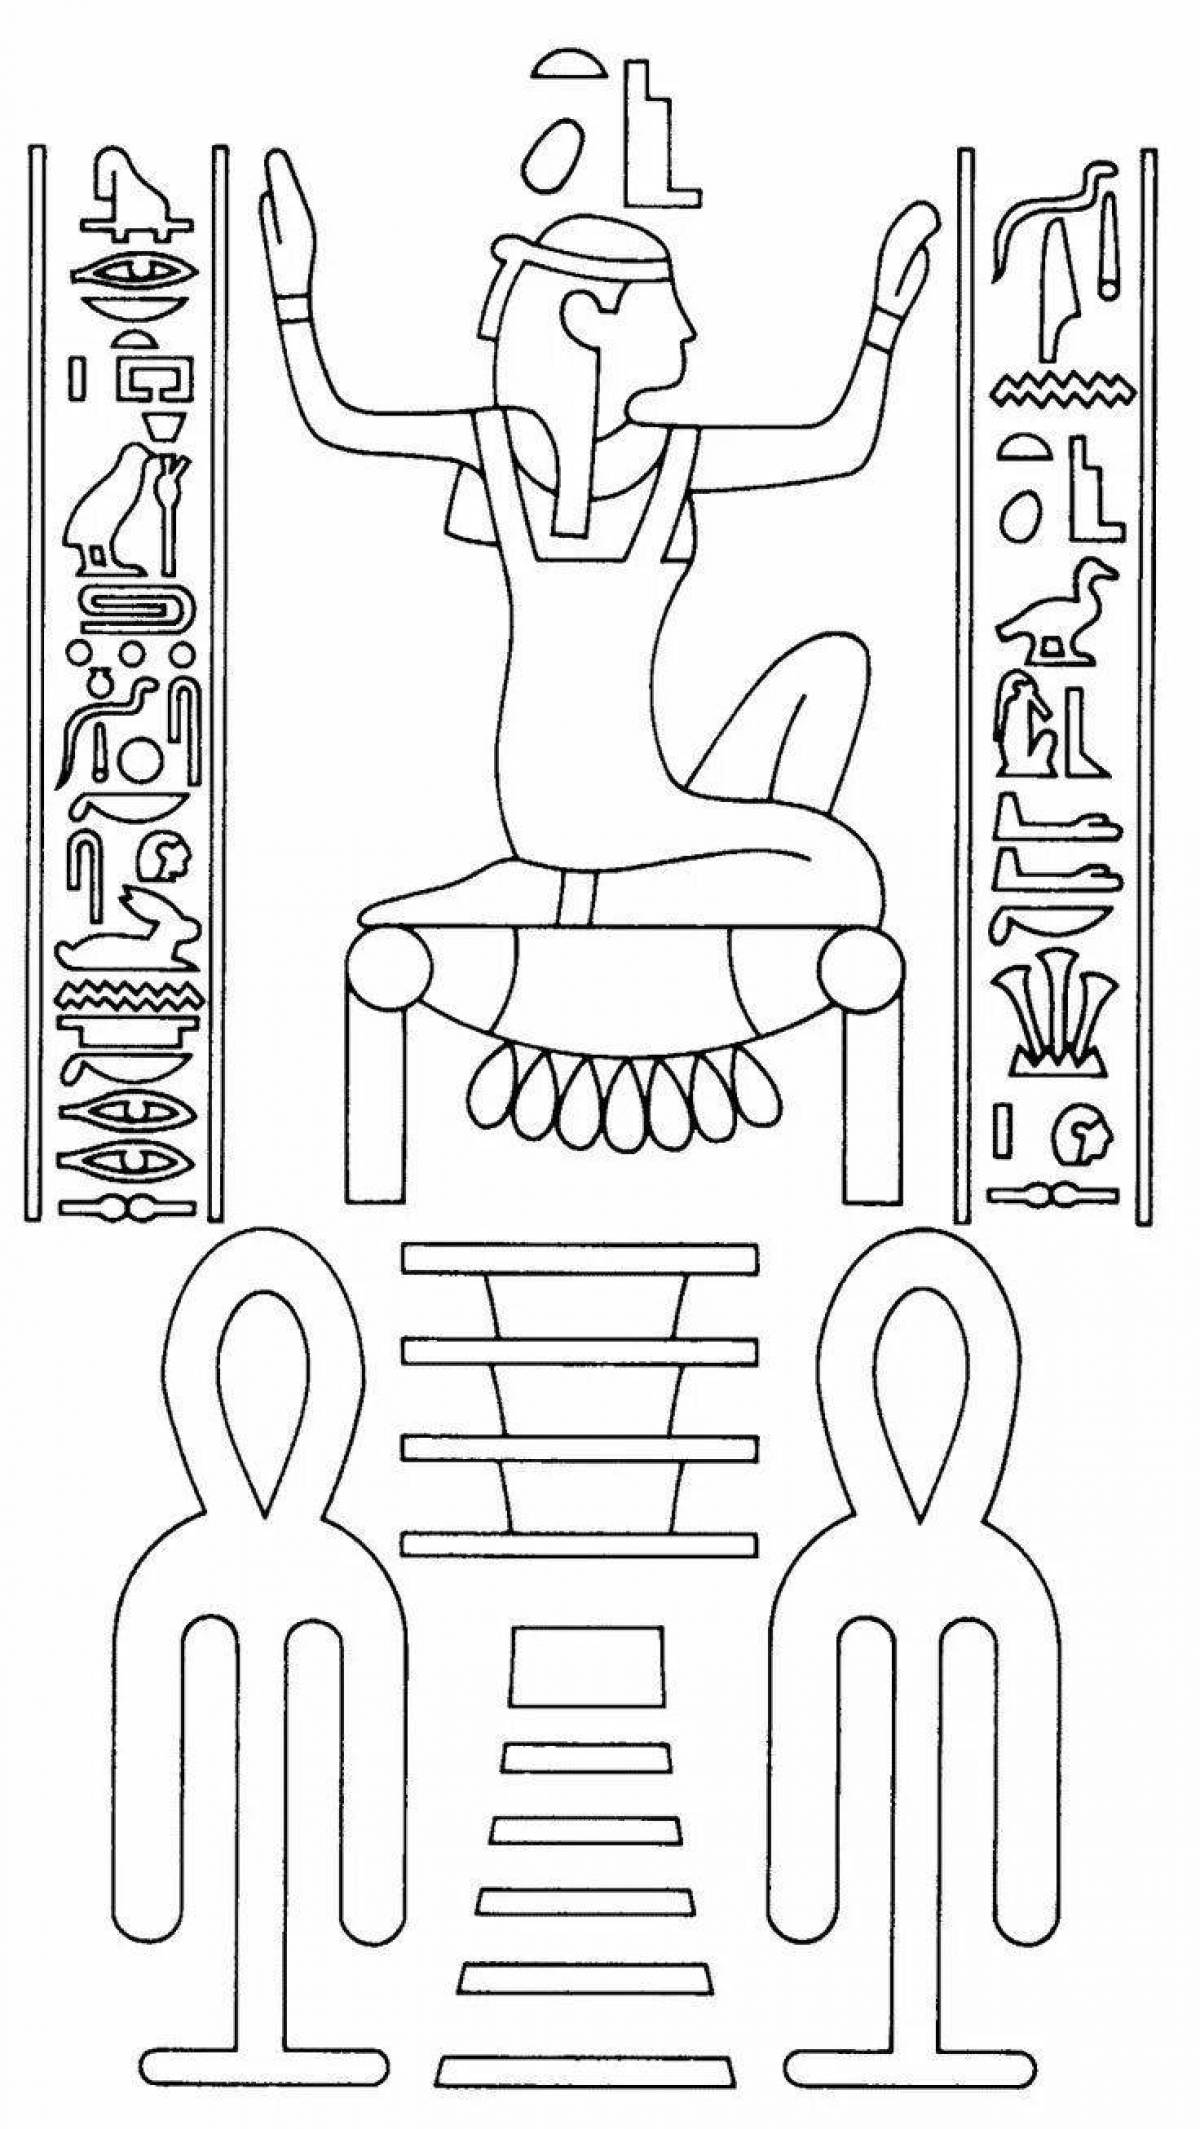 Impressive ancient egypt coloring book for kids